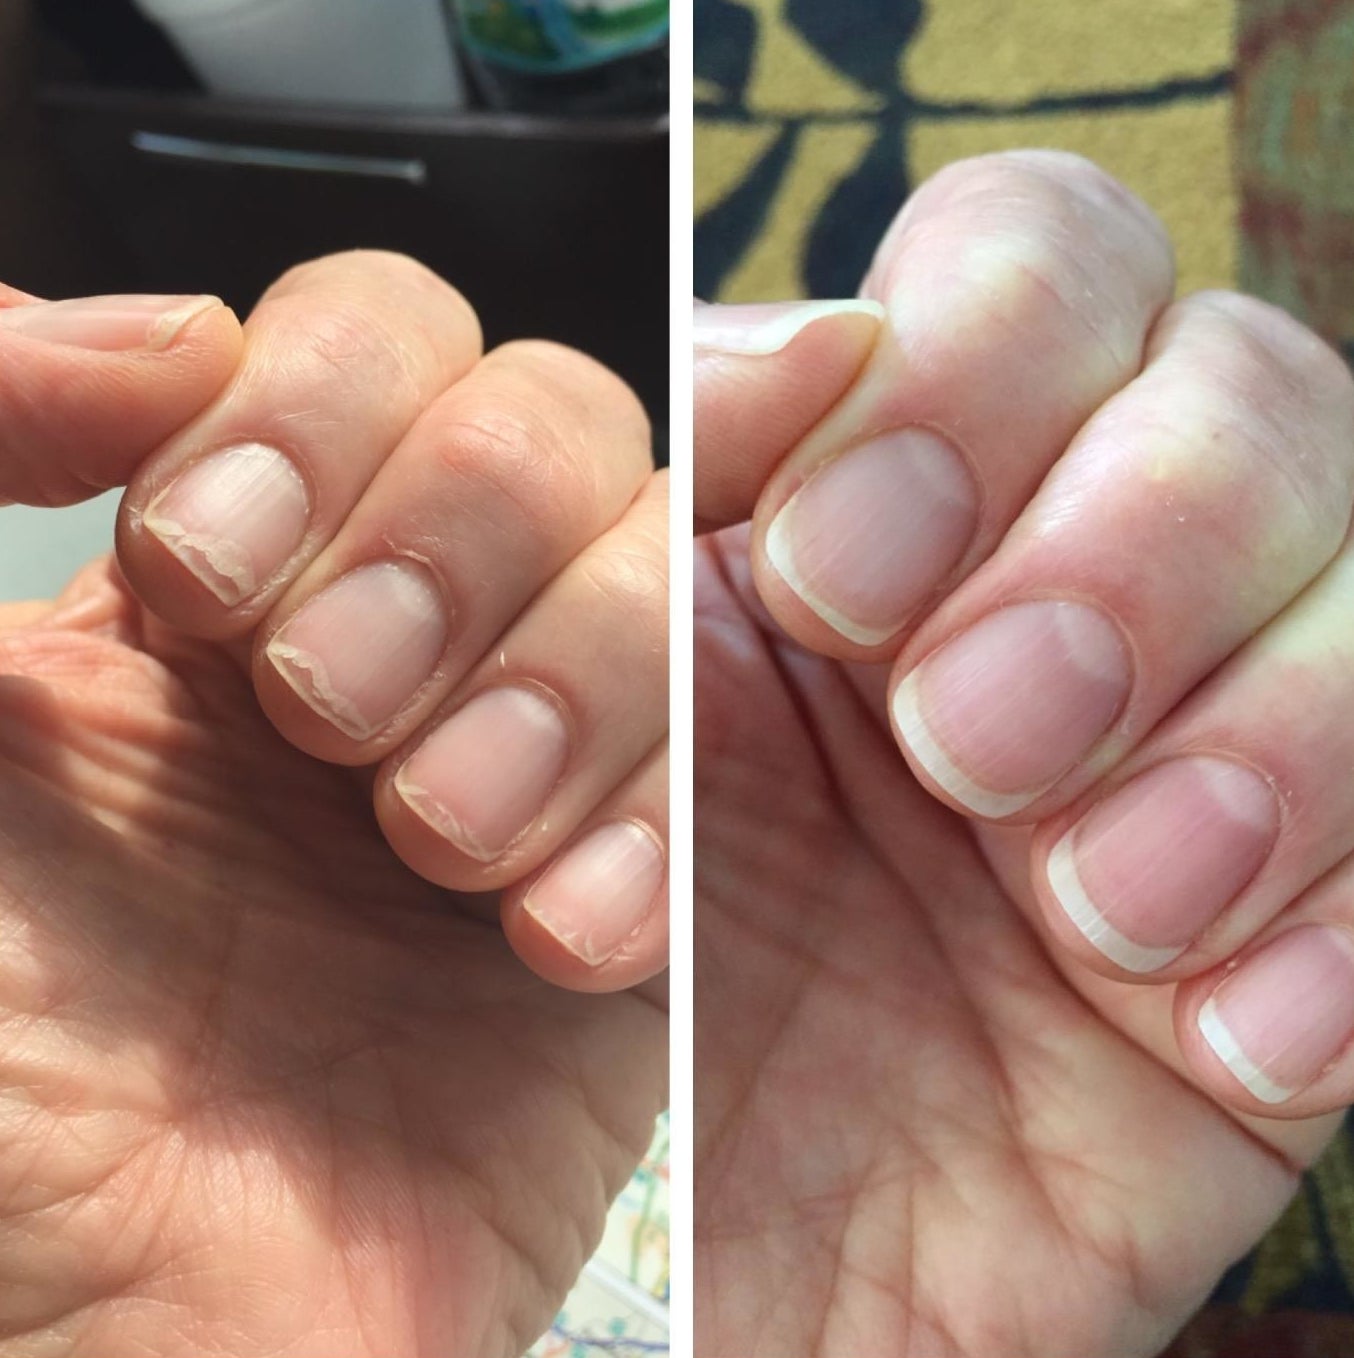 A before image of a reviewer&#x27;s brittle nails and an after image of them much heaithier